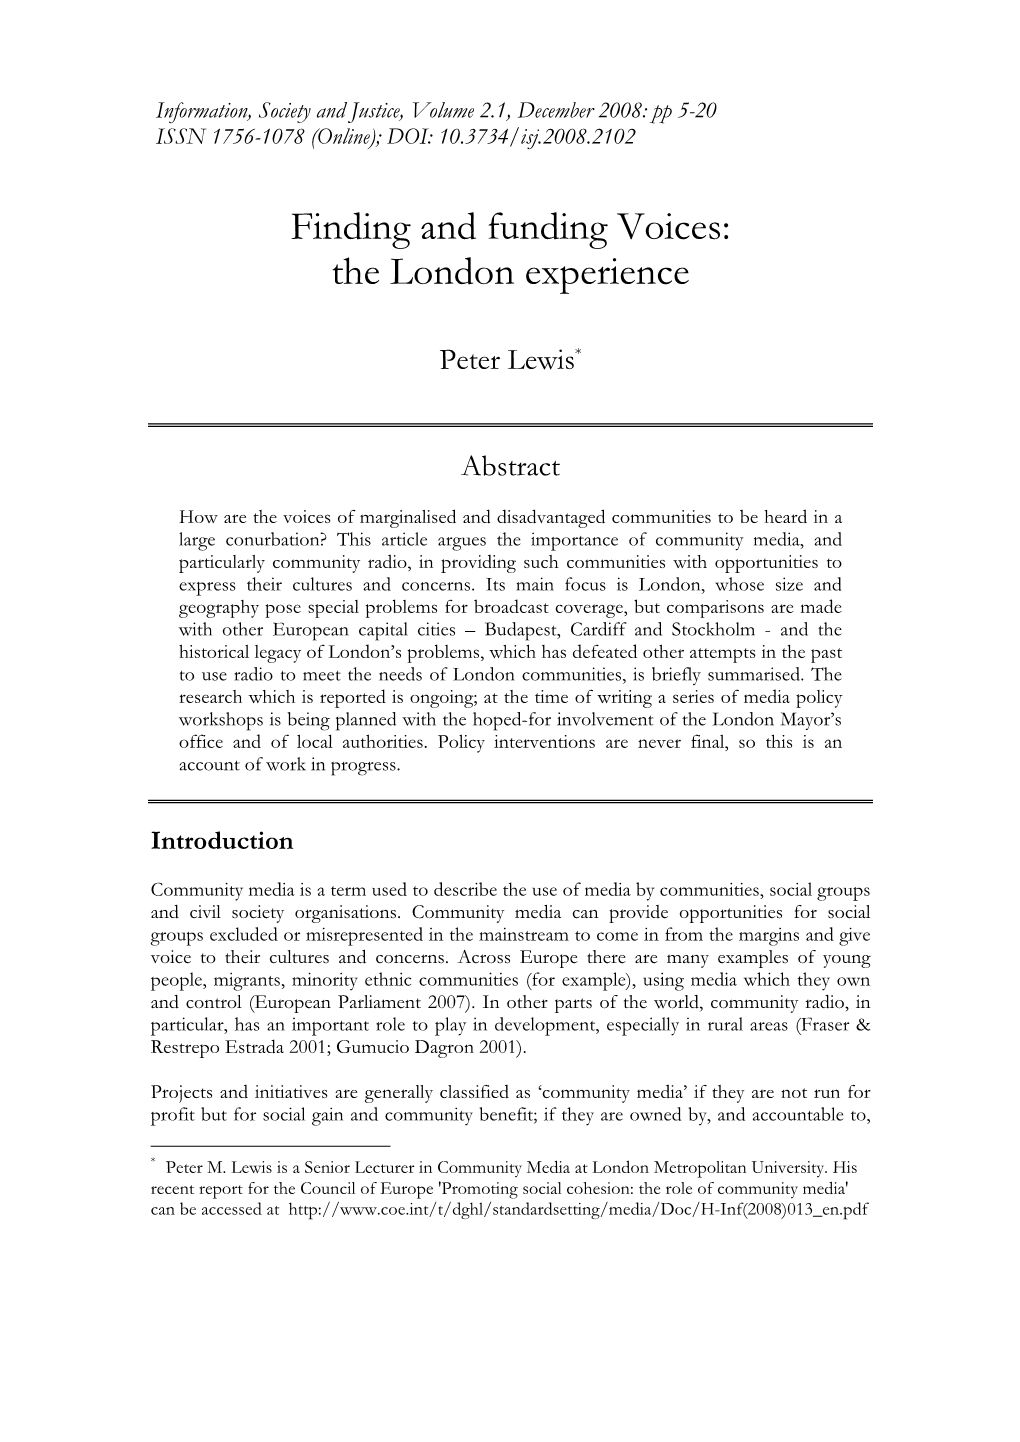 Finding and Funding Voices: the London Experience